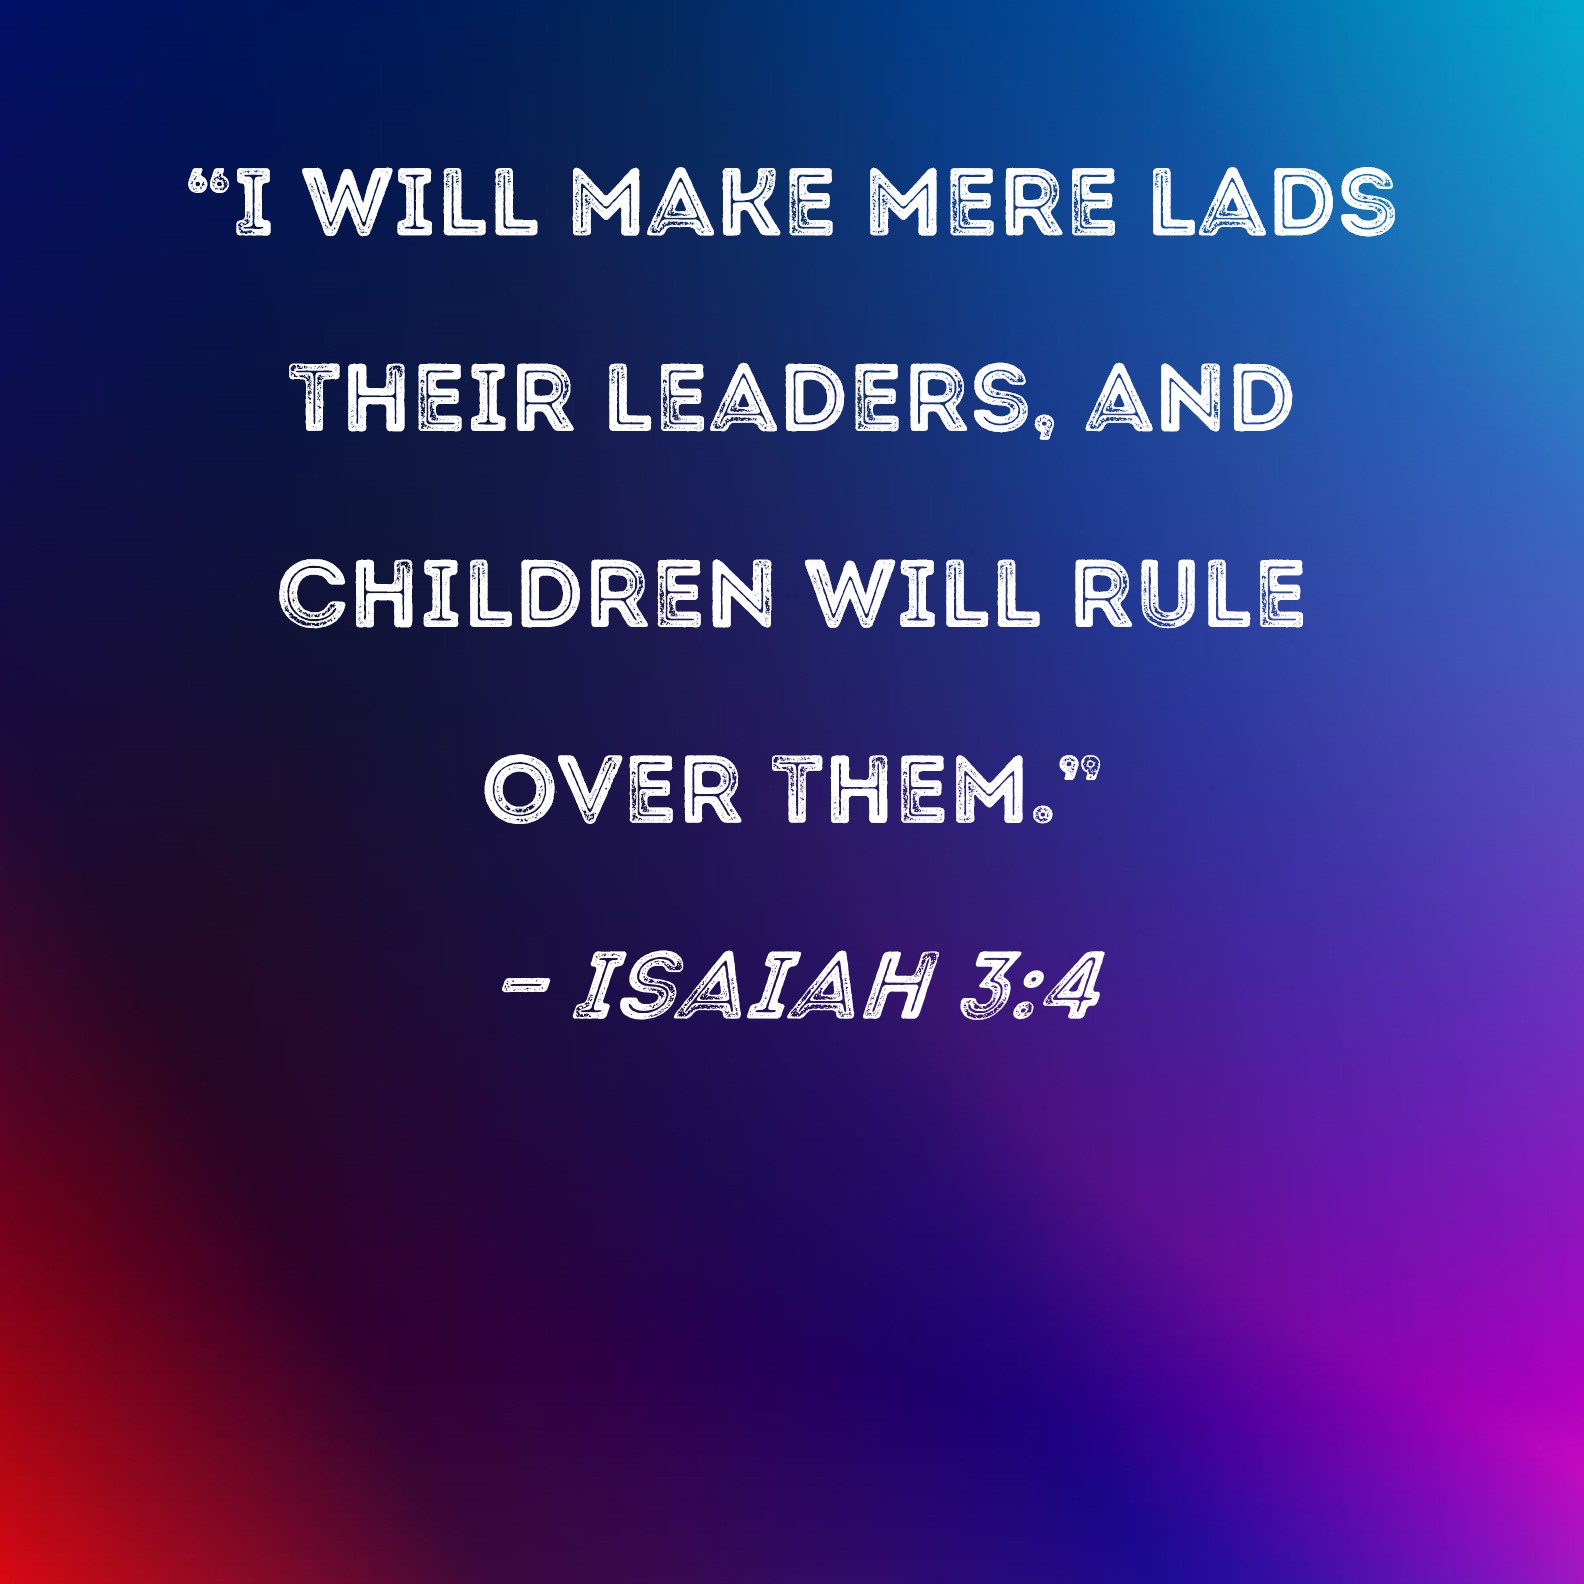 Isaiah 34 "I will make mere lads their leaders, and children will rule